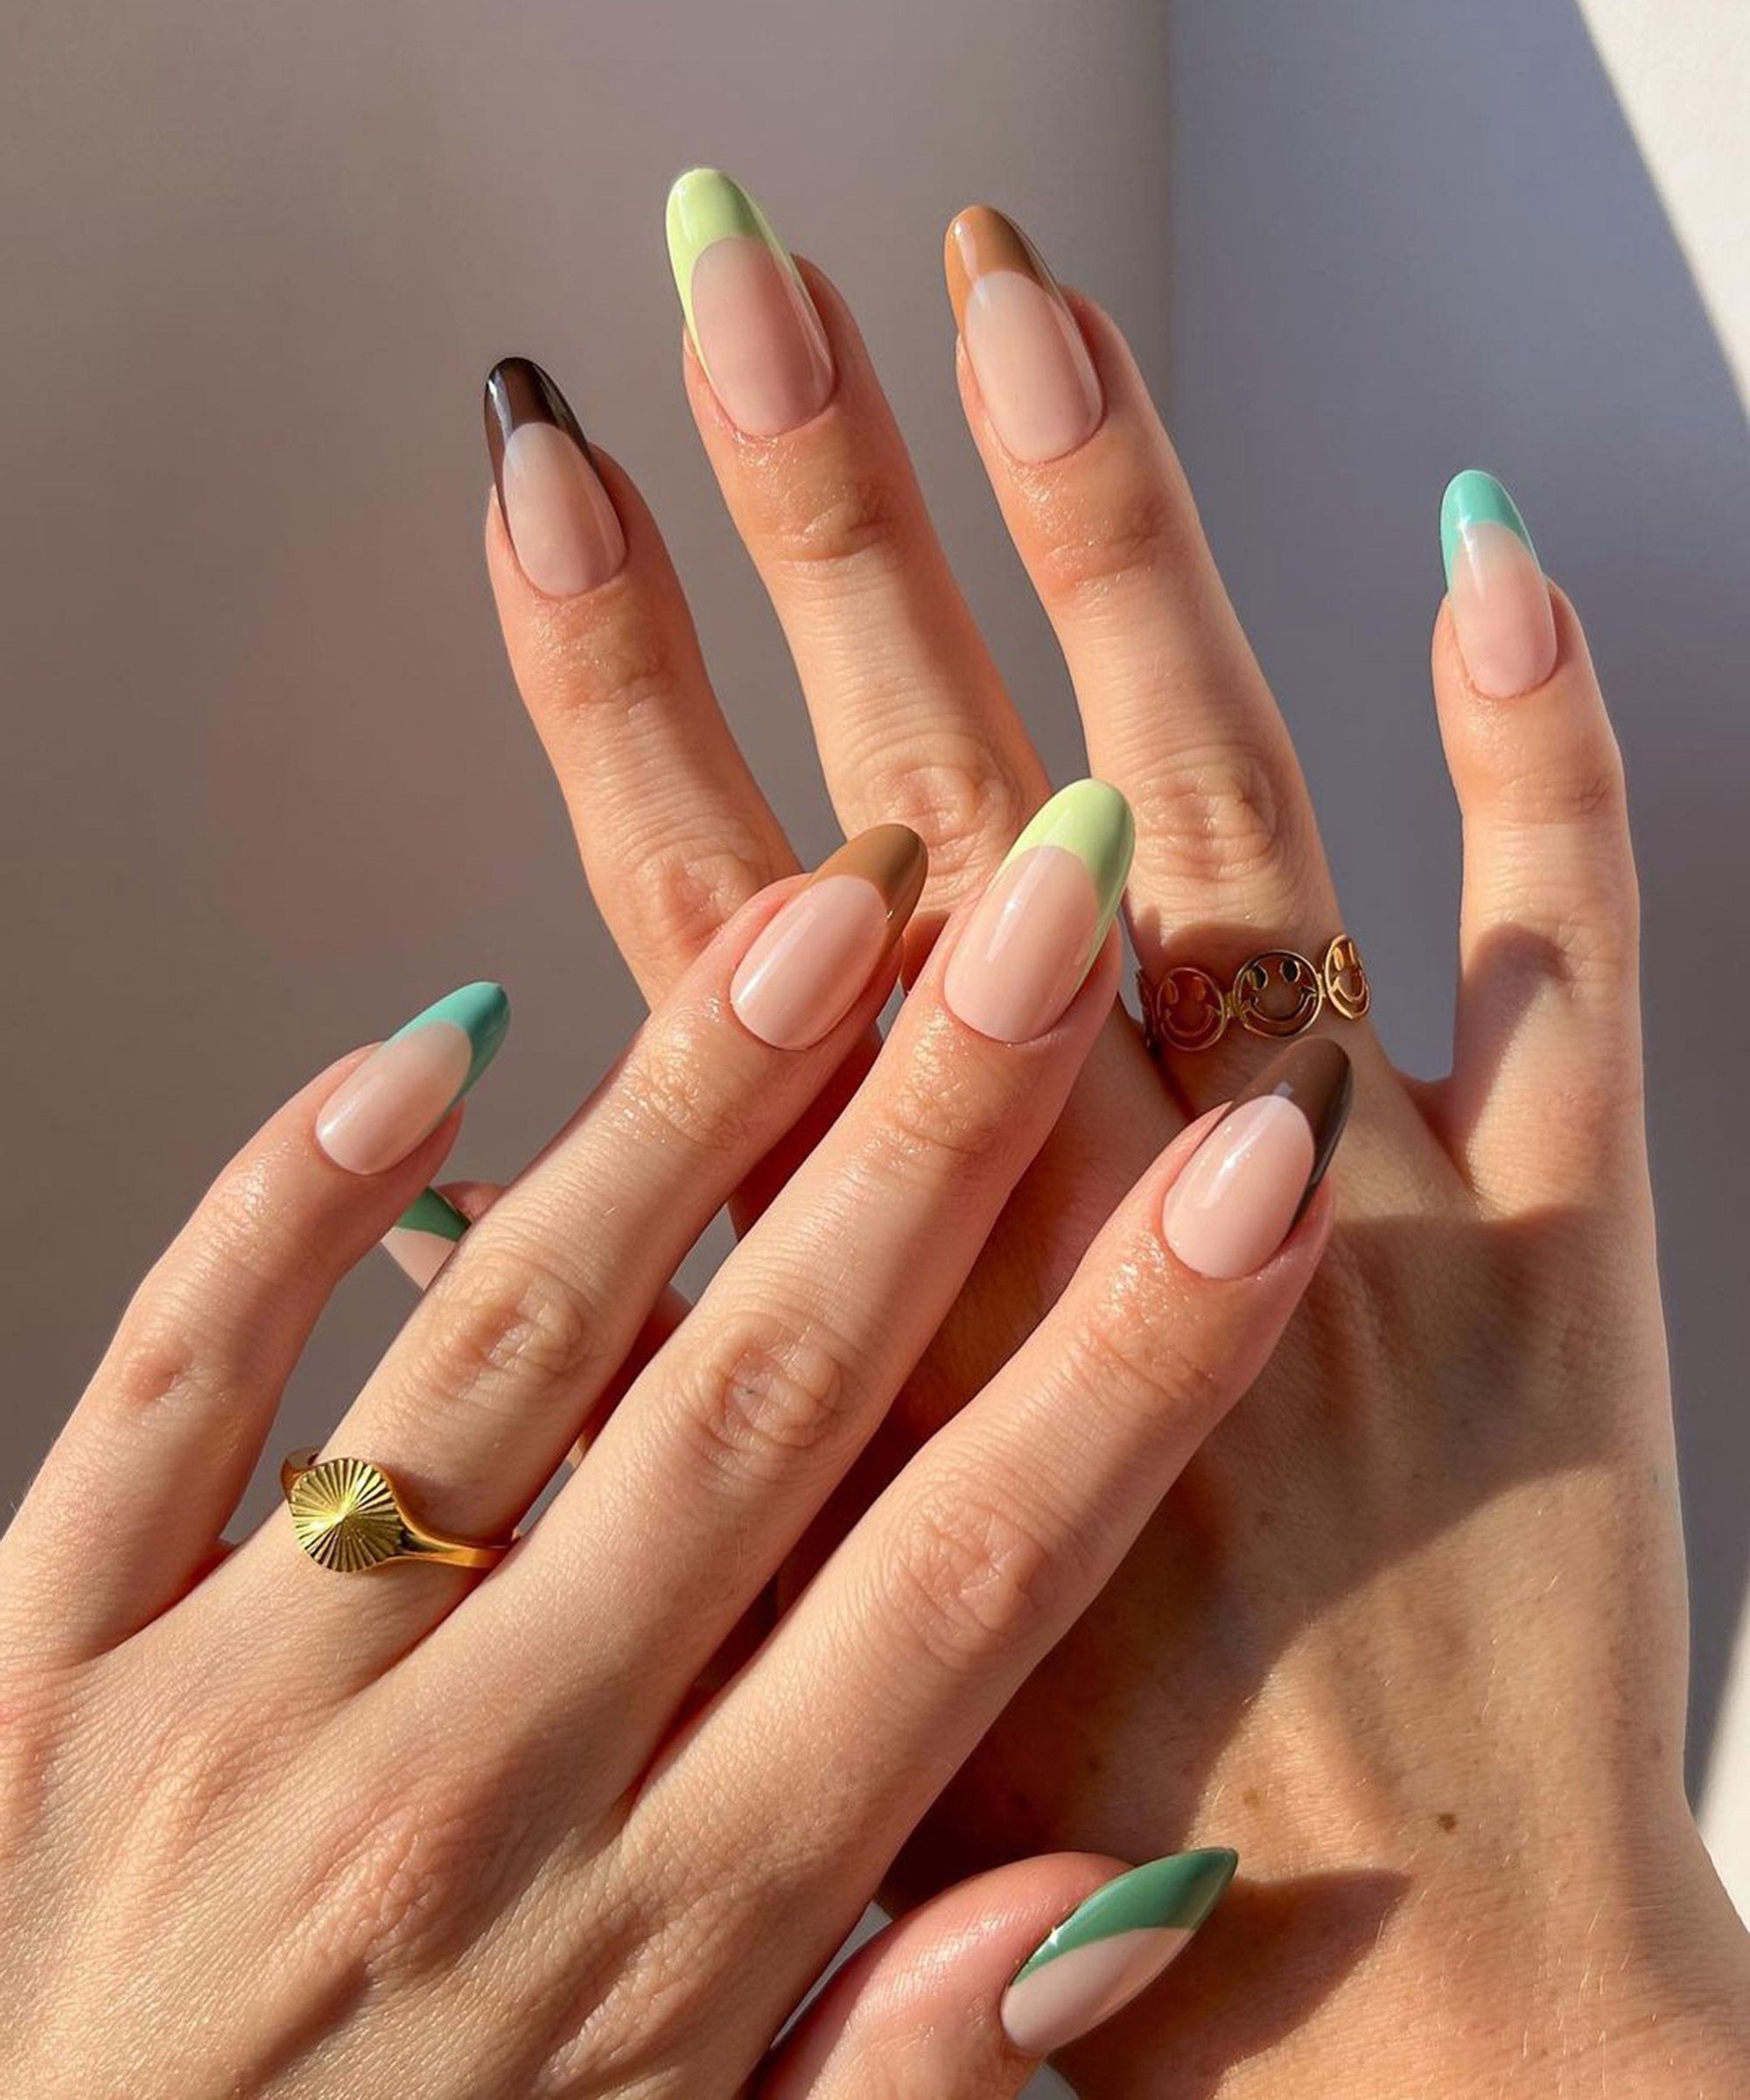 41 Nail Art Designs To Try This Autumn - Beauty Bay Edited